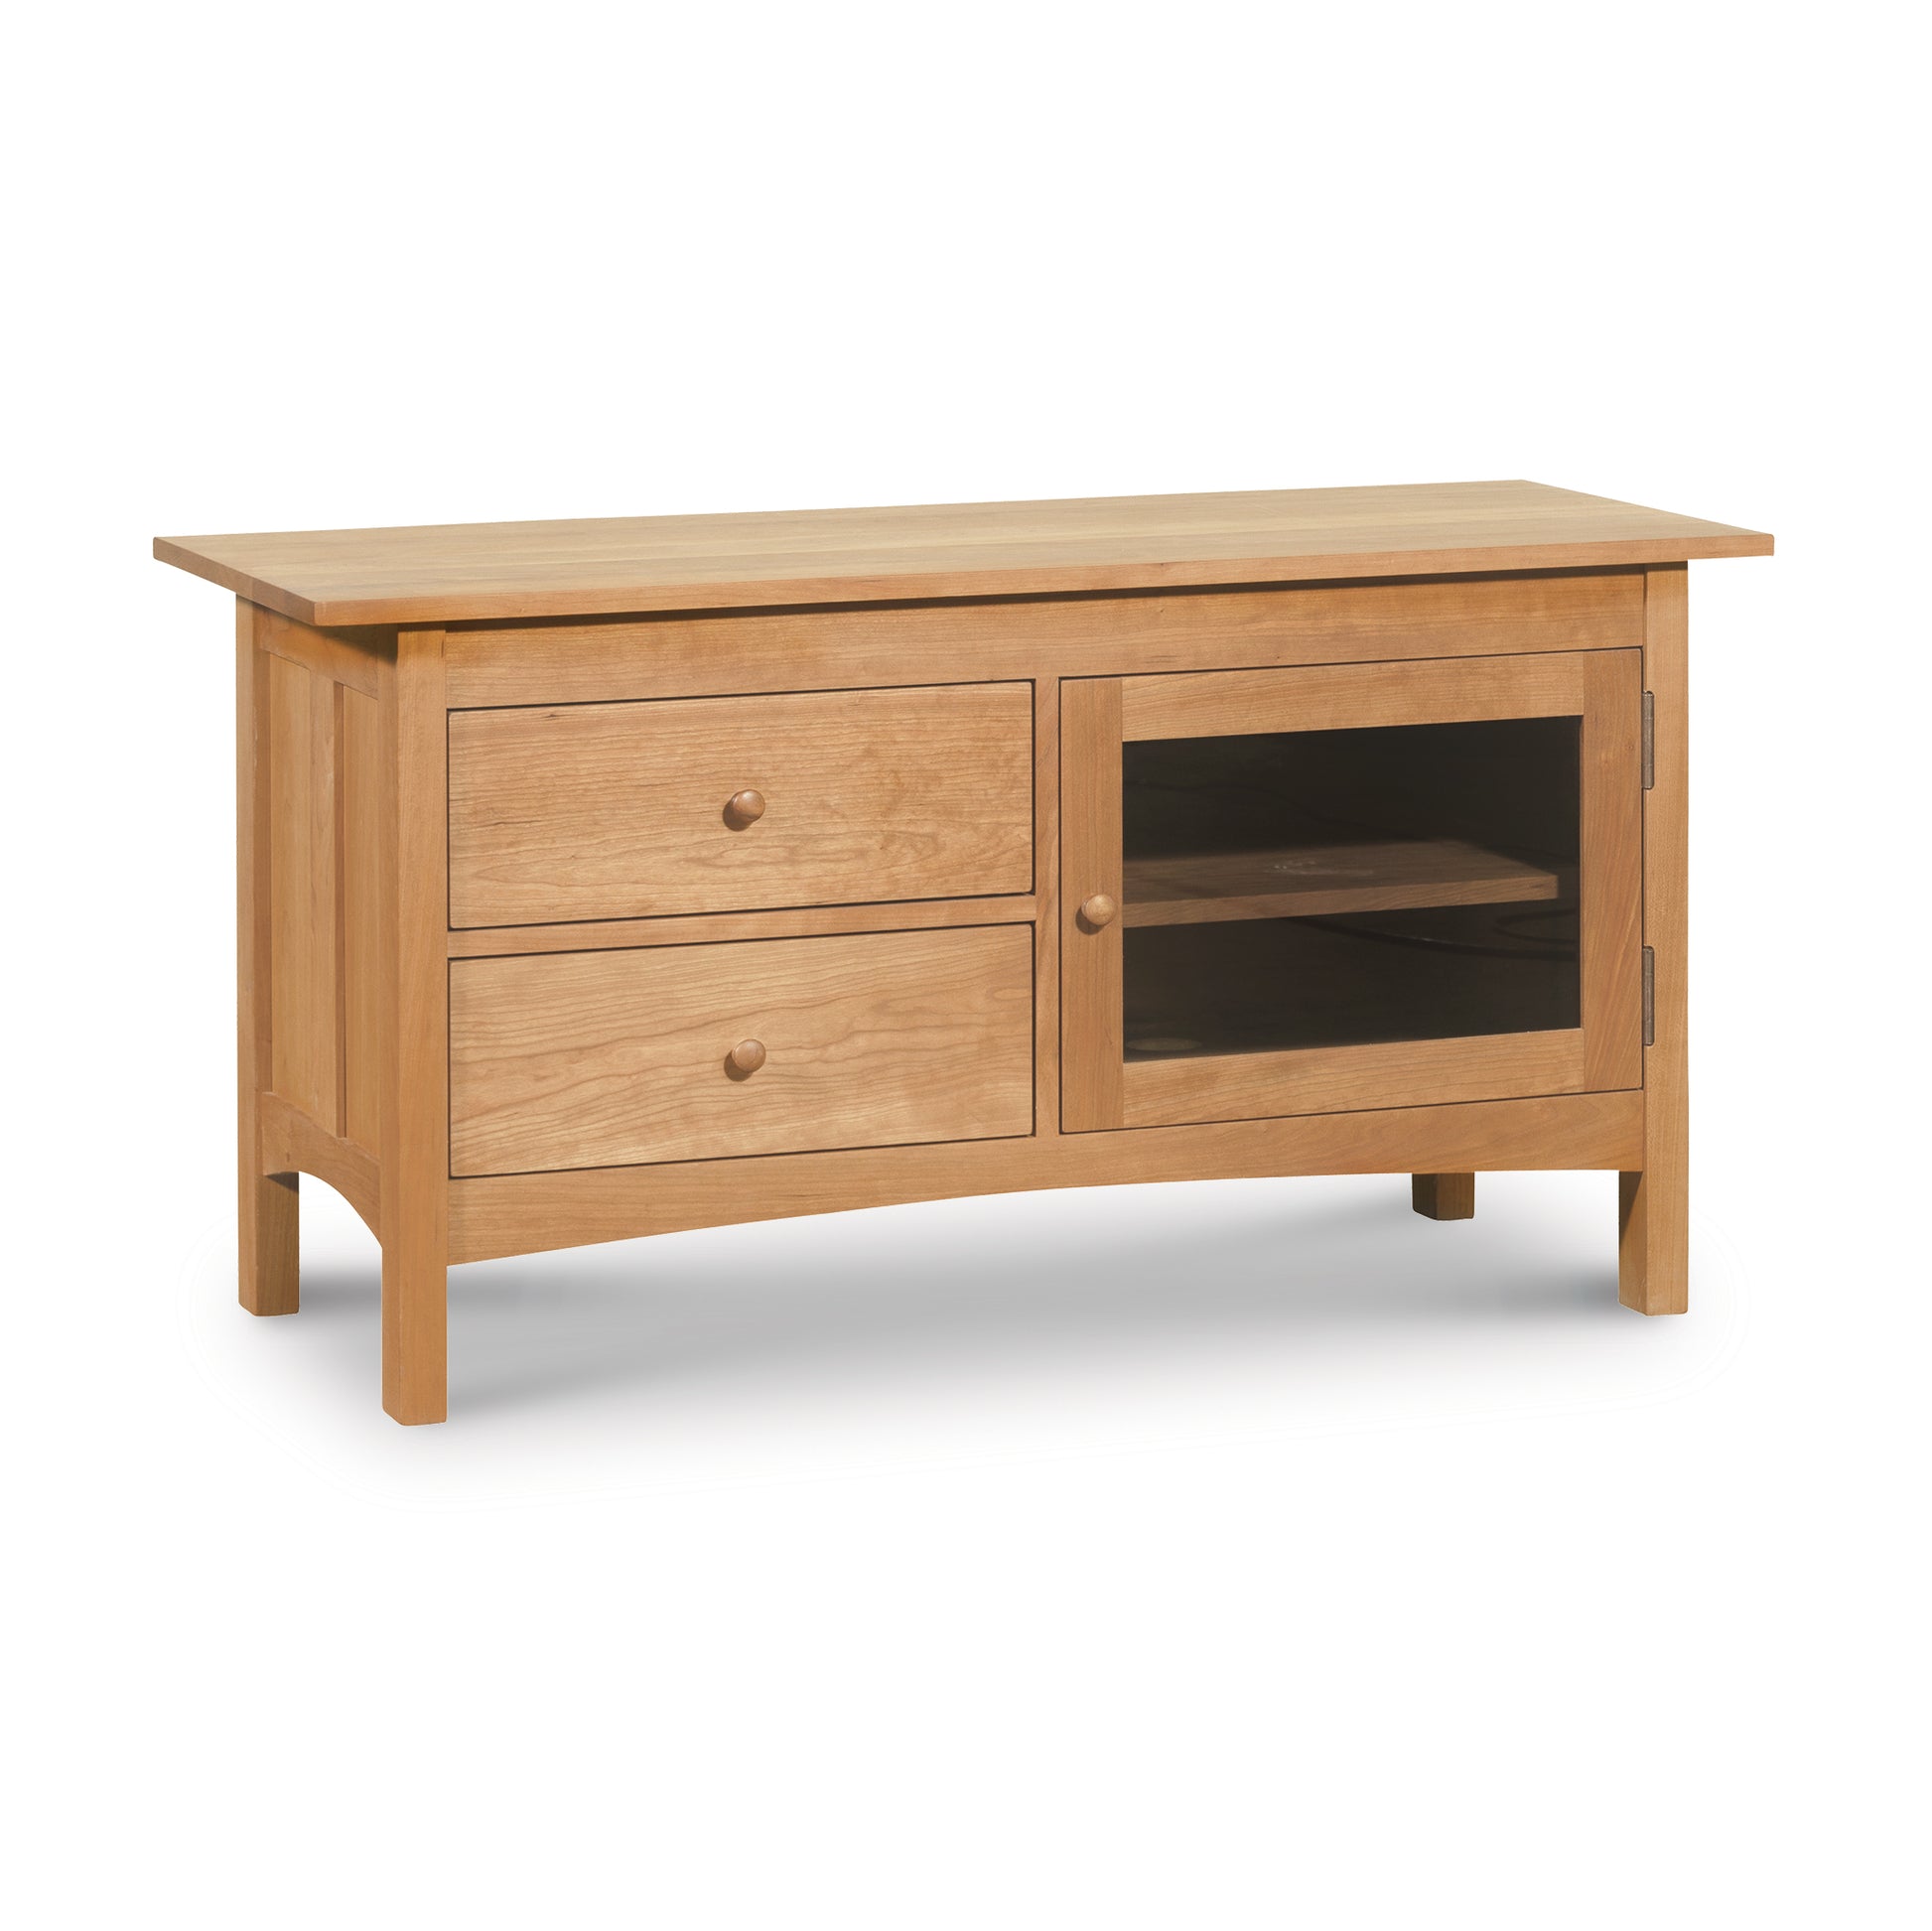 A Vermont Furniture Designs Burlington Shaker Two Drawer Media Console with a shelf, isolated on a white background.